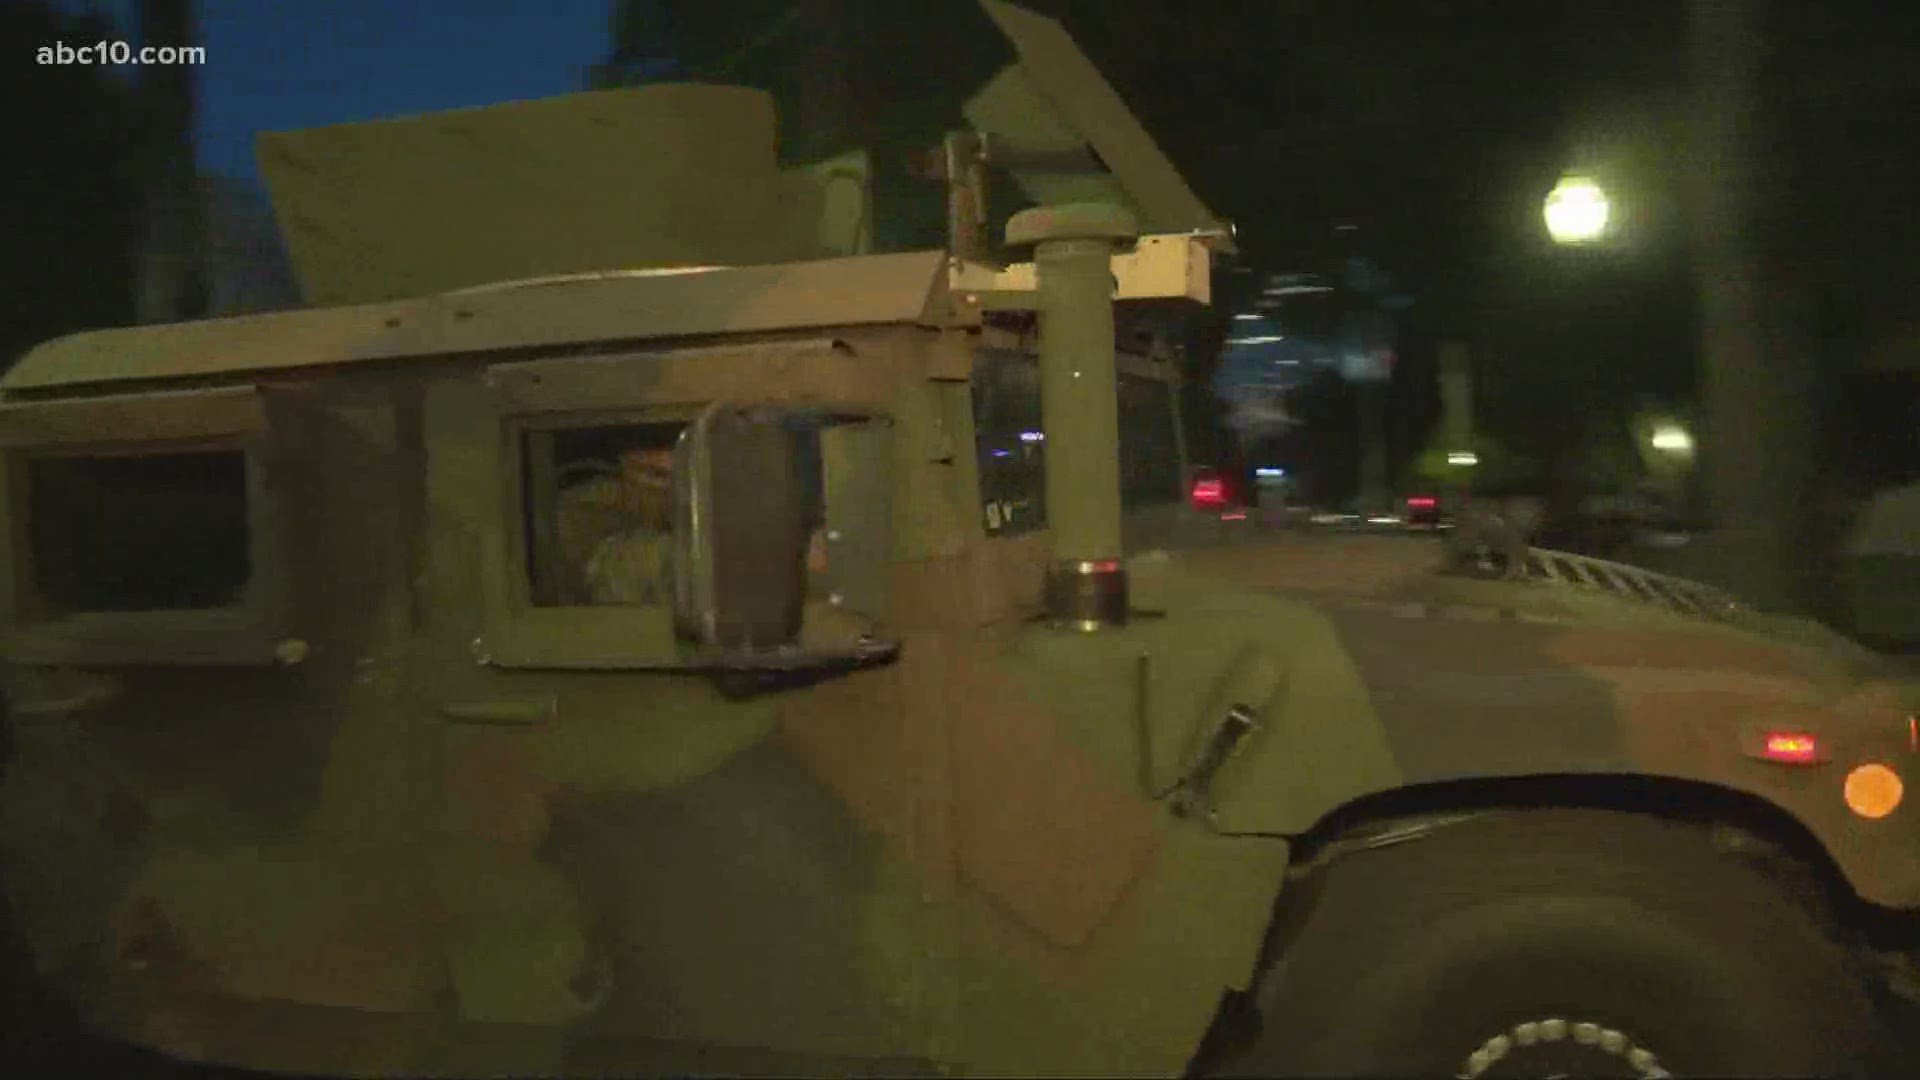 The National Guard patrols Sacramento and the state capitol following days of protests after the death of George Floyd. The city was under curfew on Monday night.